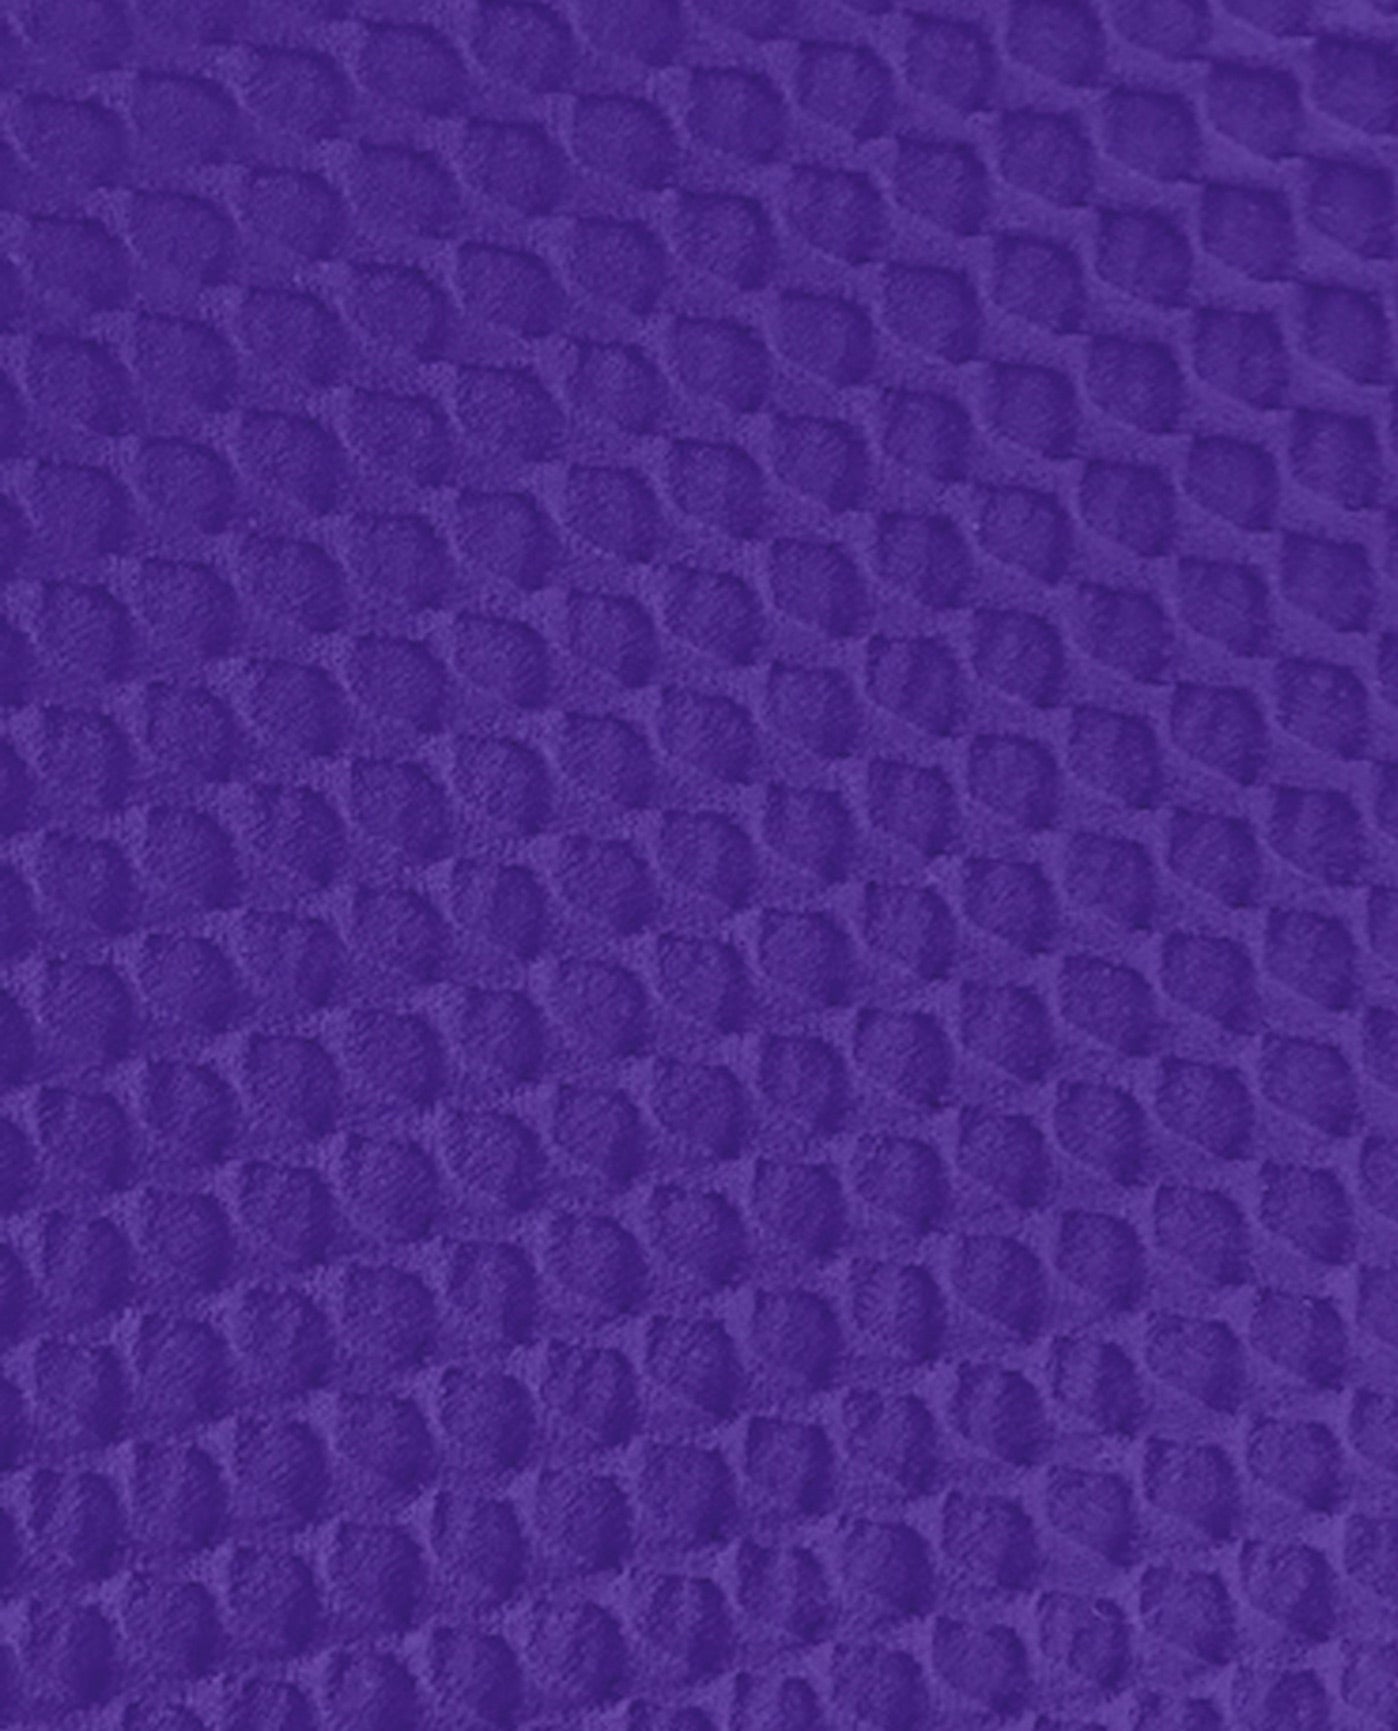 FABRIC DETAIL OF CHLORINE RESISTANT AQUAMORE COLOR BLOCK TEXTURED TWIST FRONT ONE PIECE SWIMSUIT | 618 AQT TEXTURED PURPLE